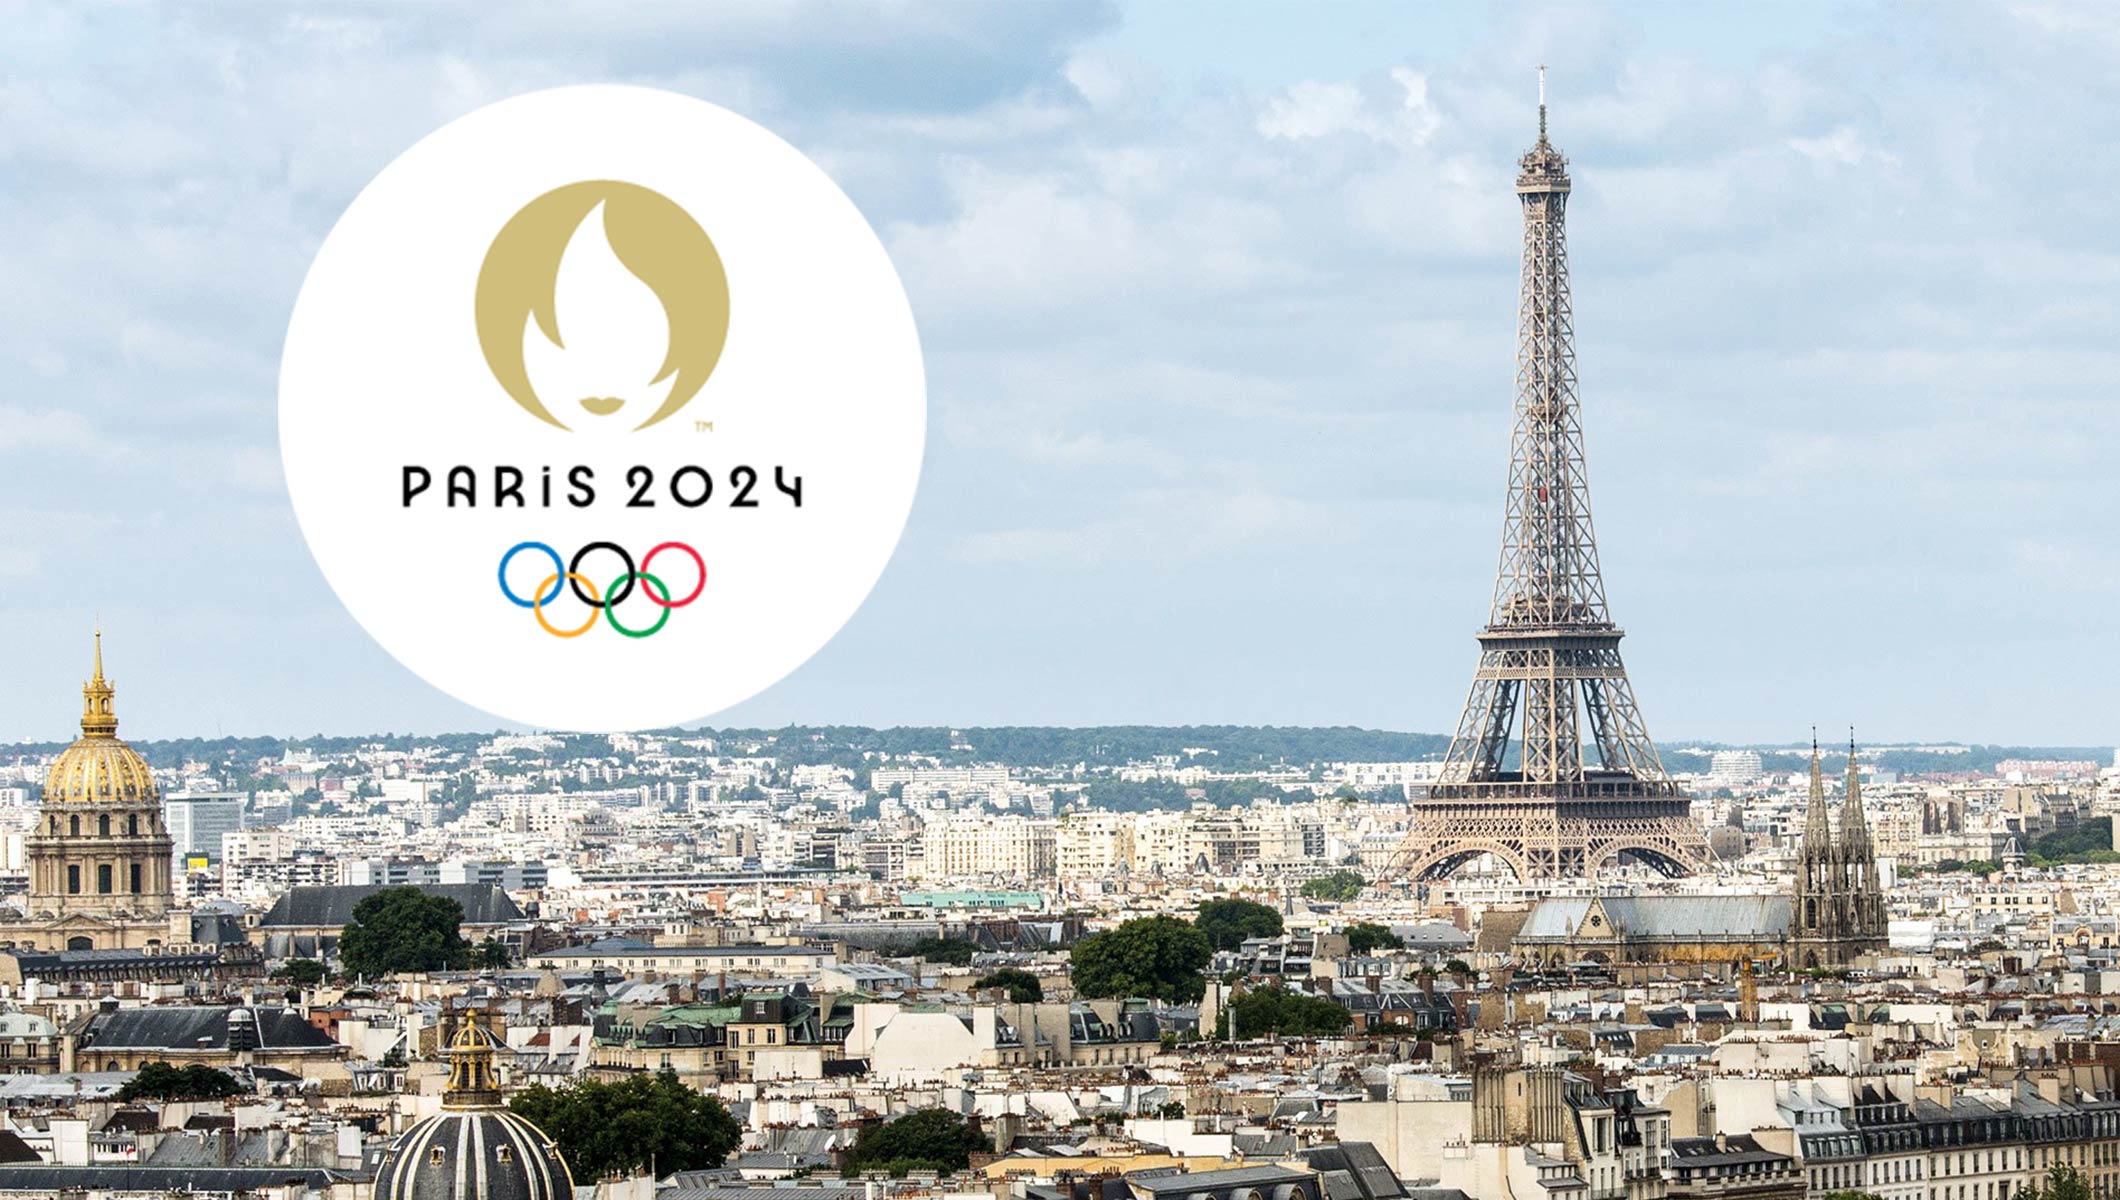 2024 Olympics / Paris 2024 Olympics When Will The Next Summer Games